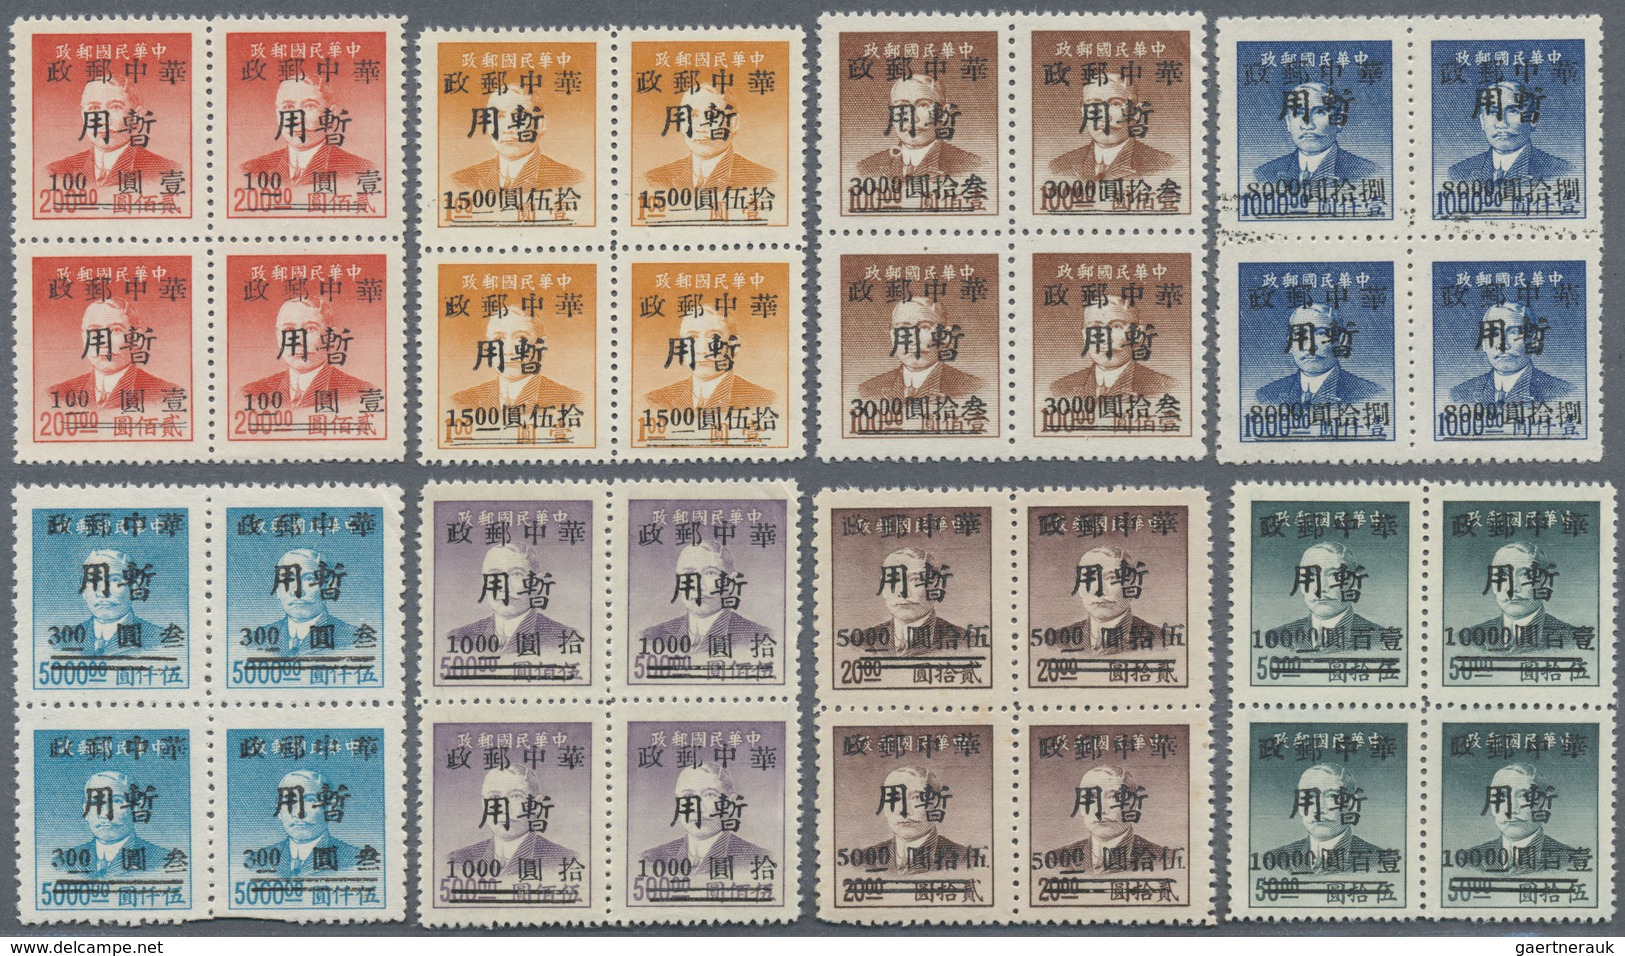 (*)/O China - Volksrepublik - Provinzen: Central China, 1948/49, unused no gum as issued or used accumulat